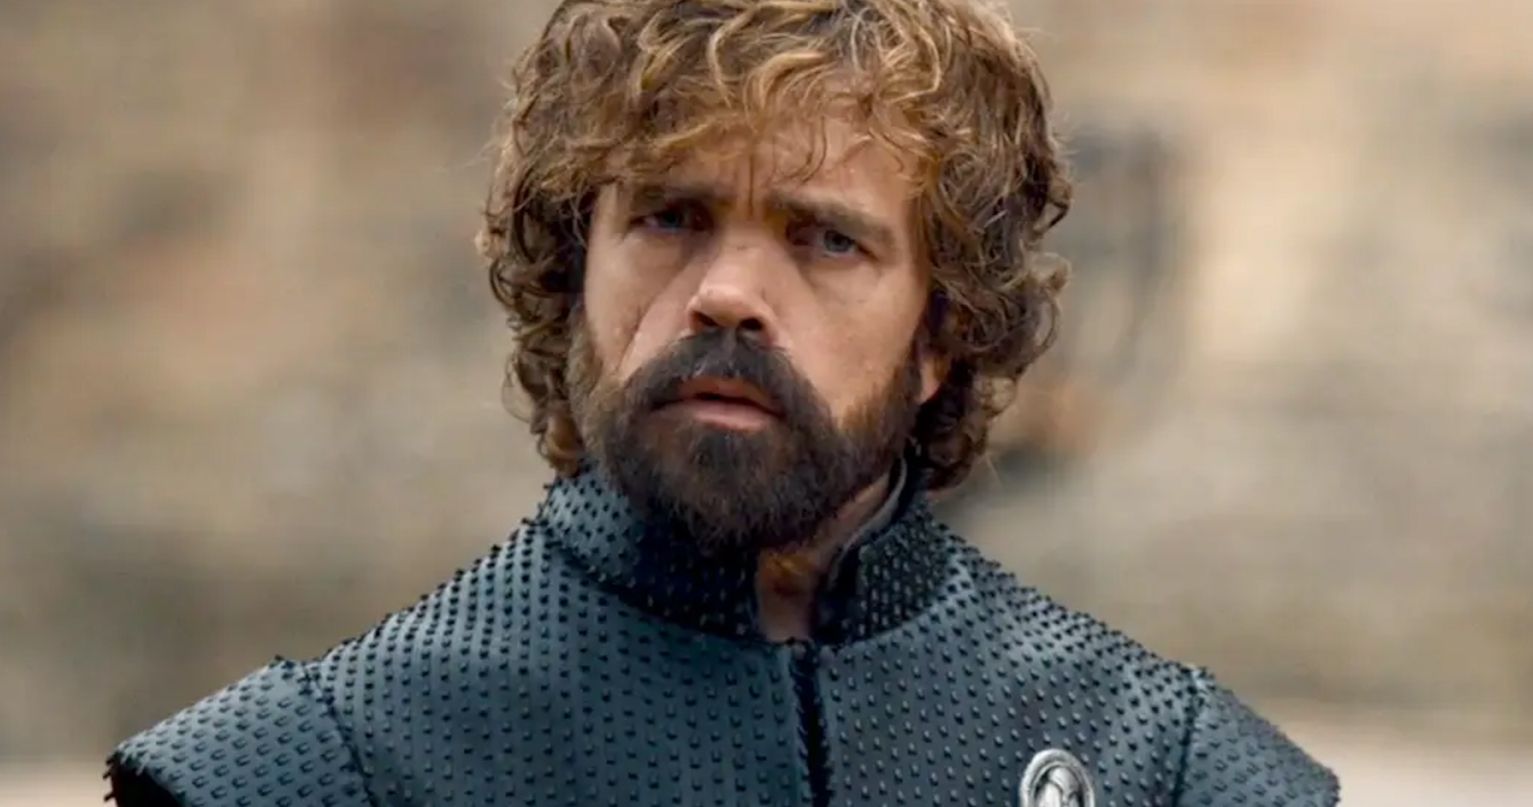 Game of Thrones Fans Celebrate Peter Dinklage on His 52nd Birthday